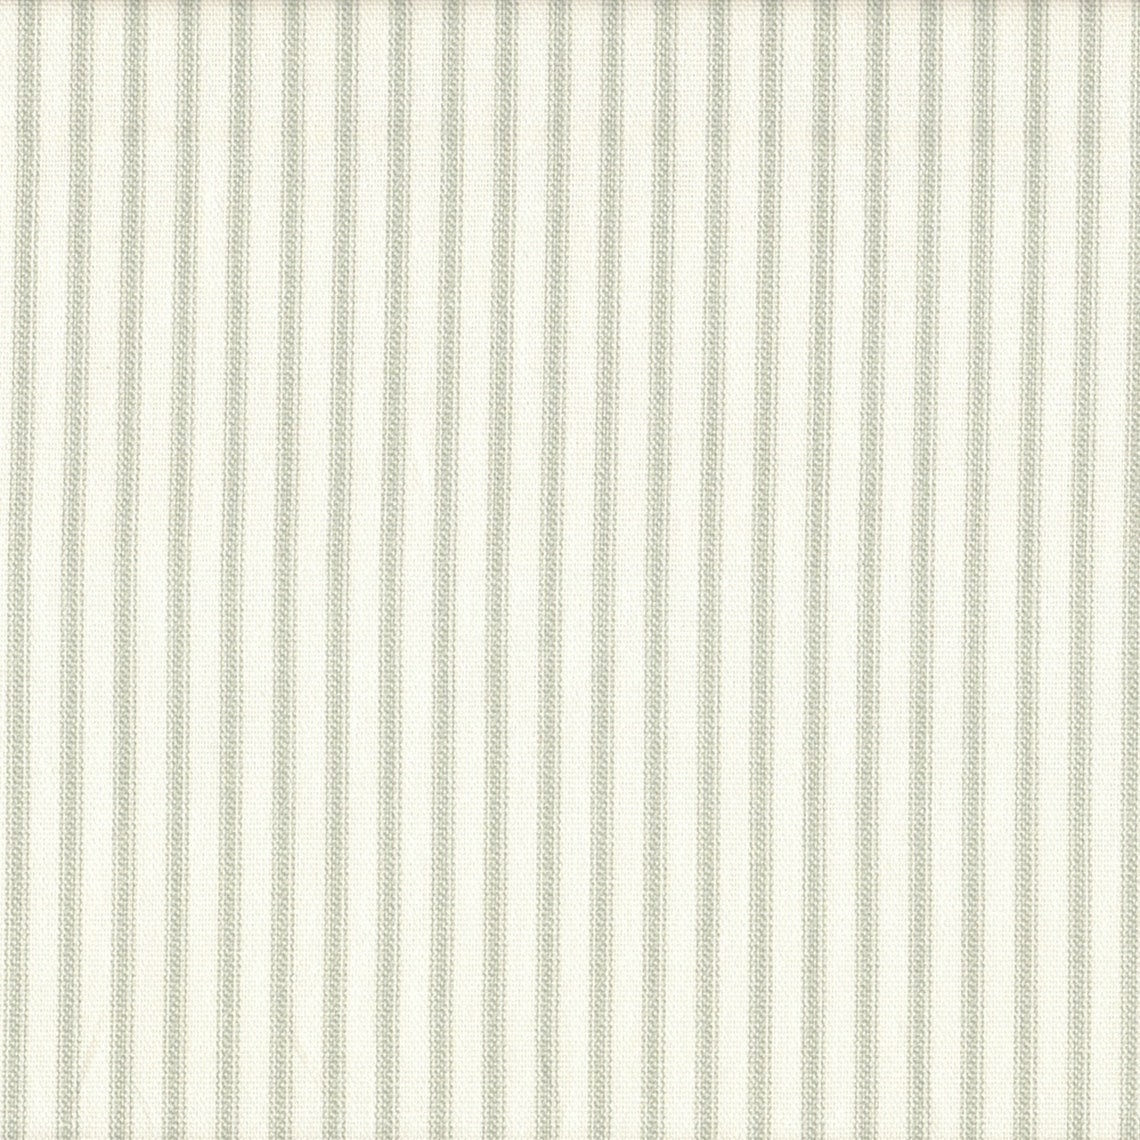 tailored bedskirt in farmhouse pale sage green ticking stripe on cream